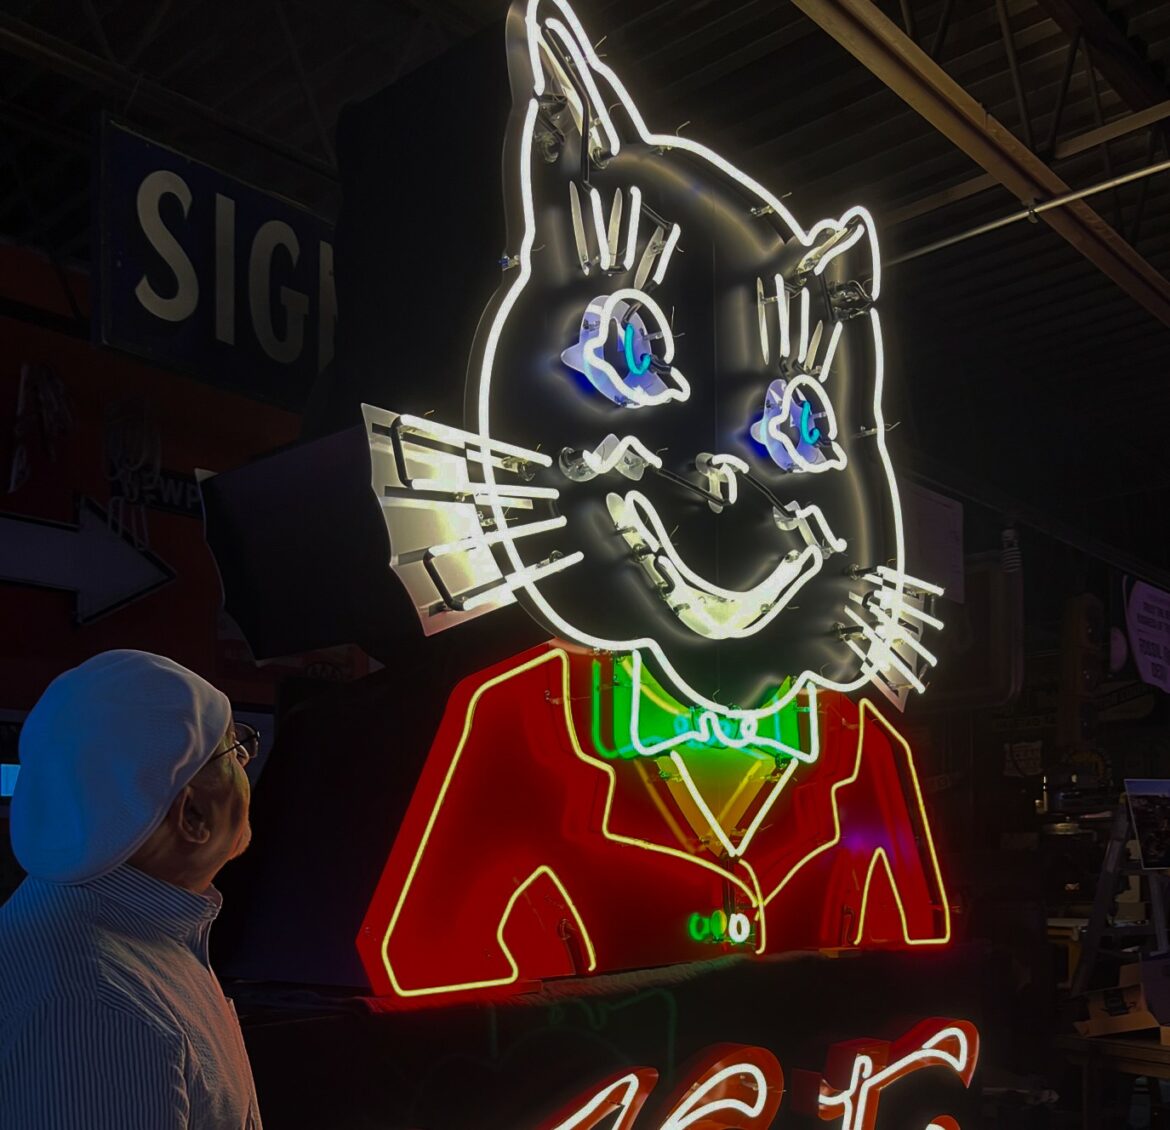 Nick Vedros, the founder of LUMI, admired the new Katz sign at its reveal last week